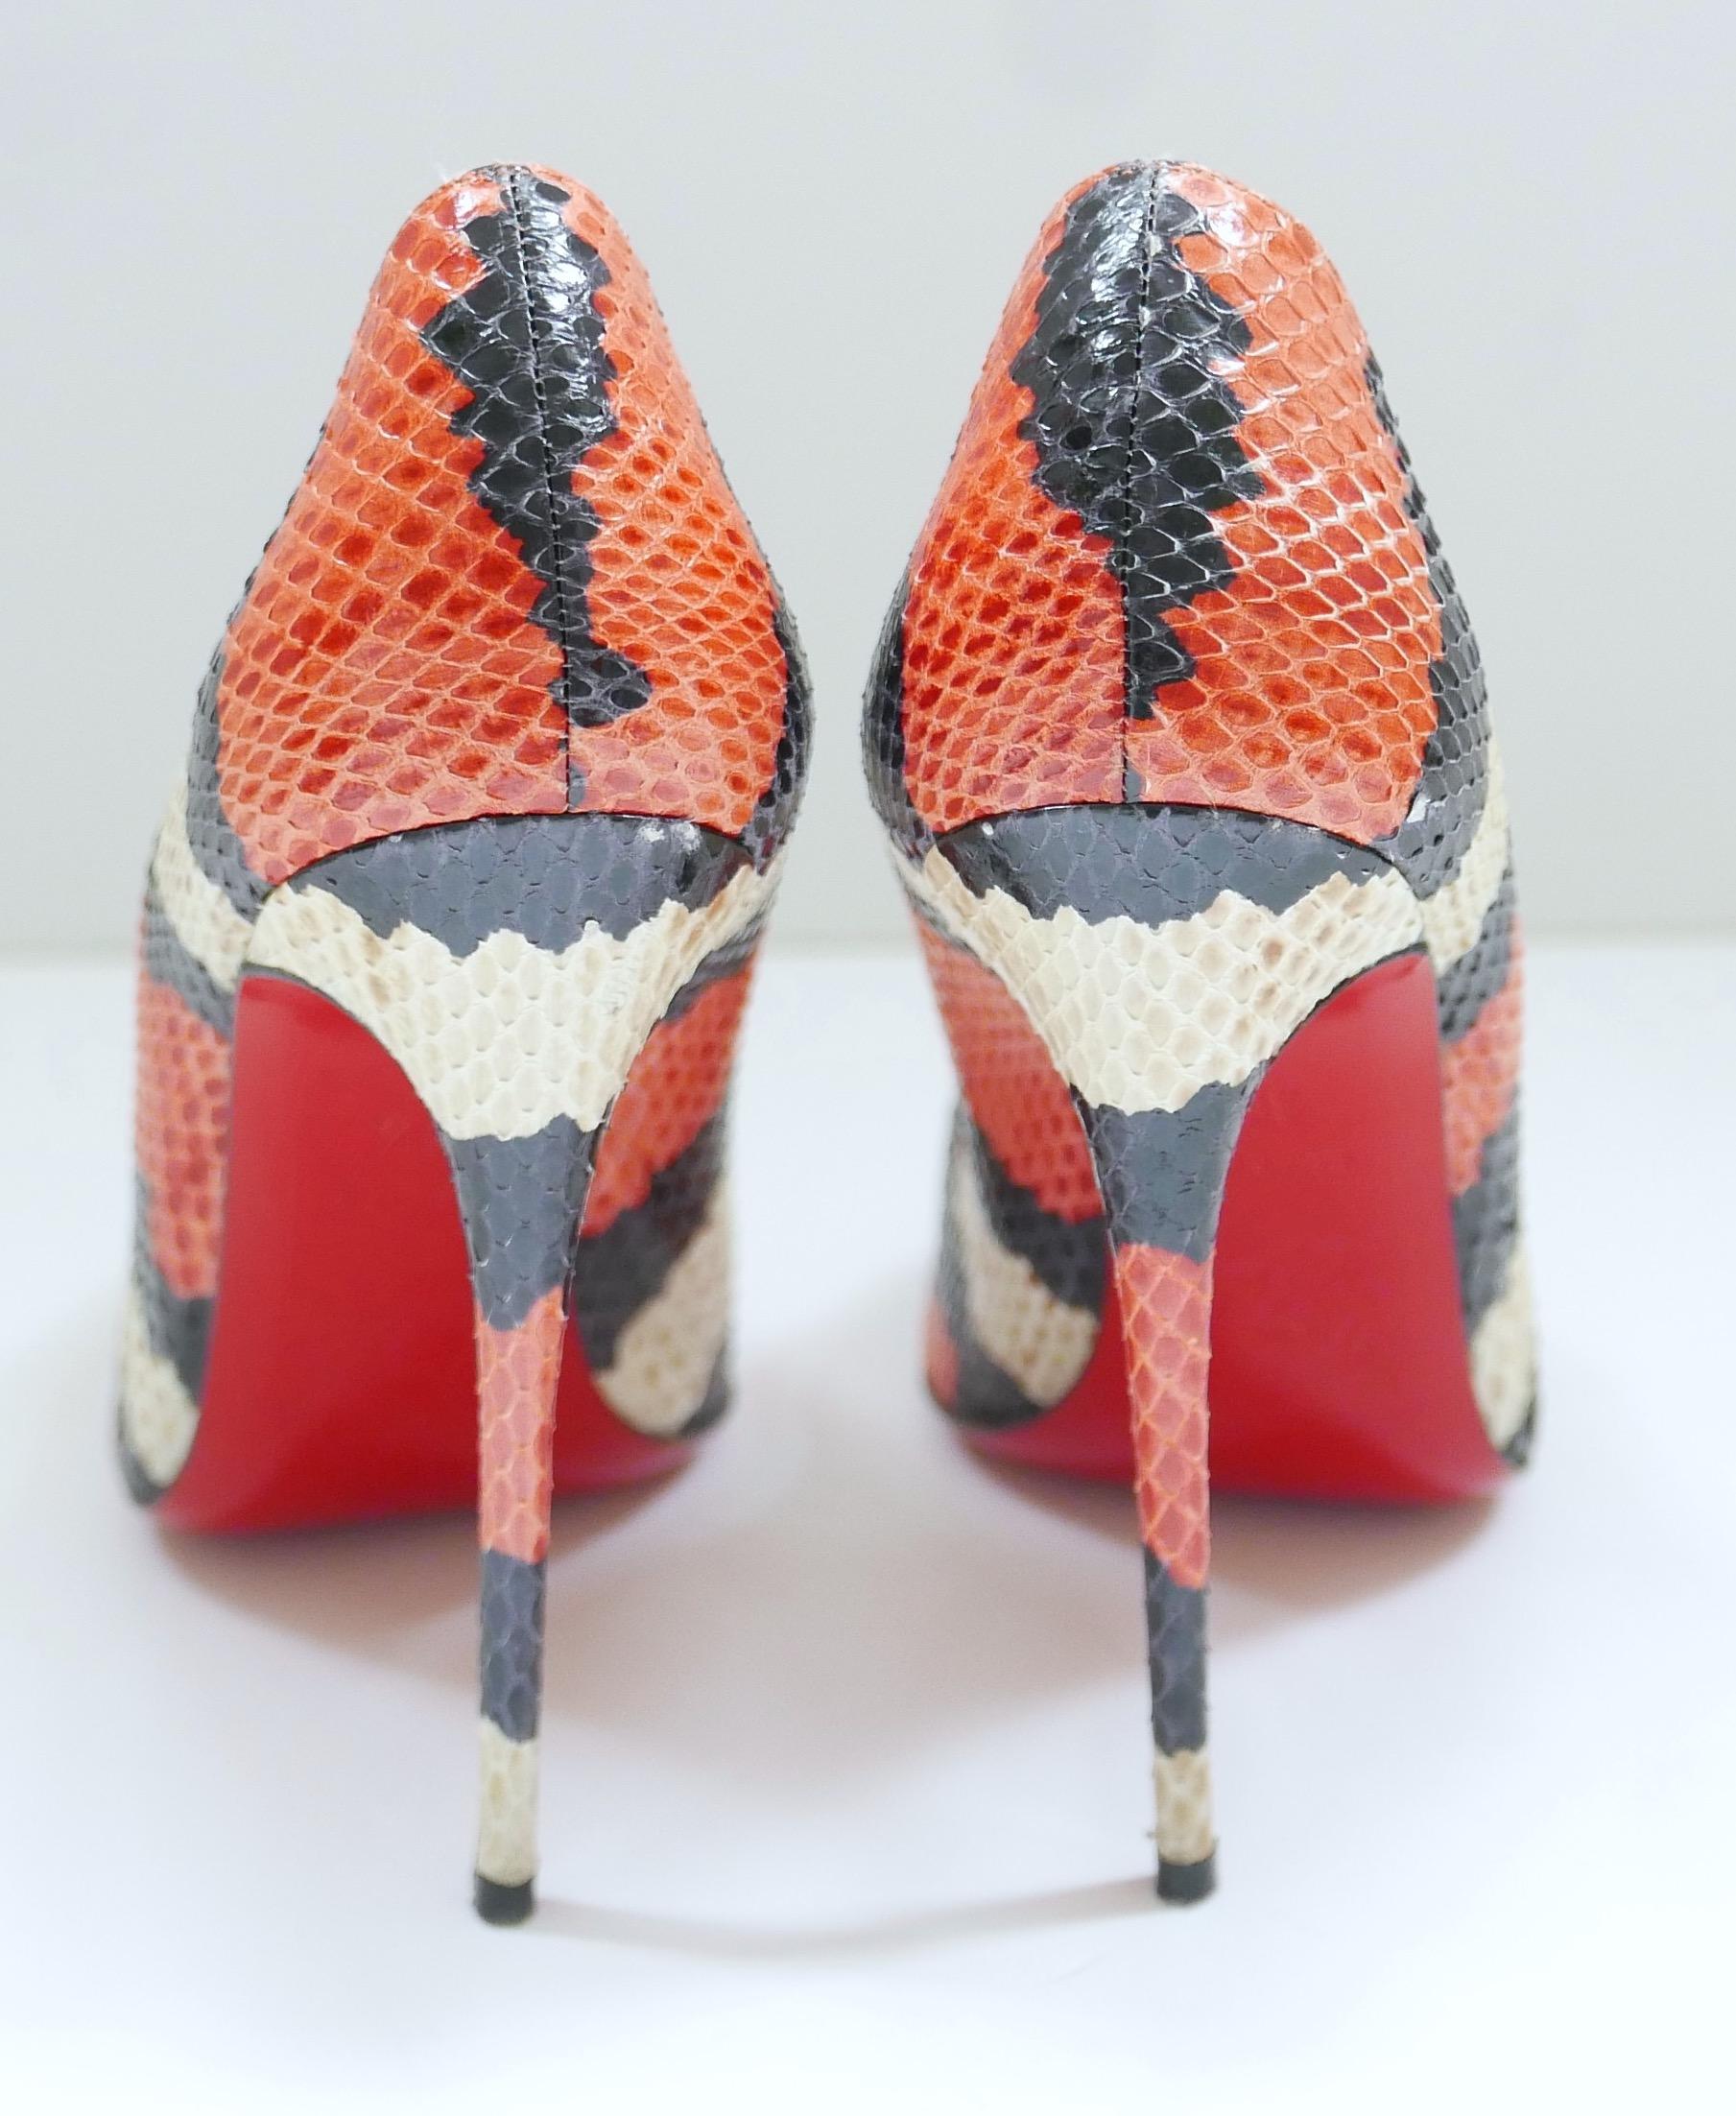 Christian Louboutin So Kate Striped Snakeskin Heels In New Condition For Sale In London, GB